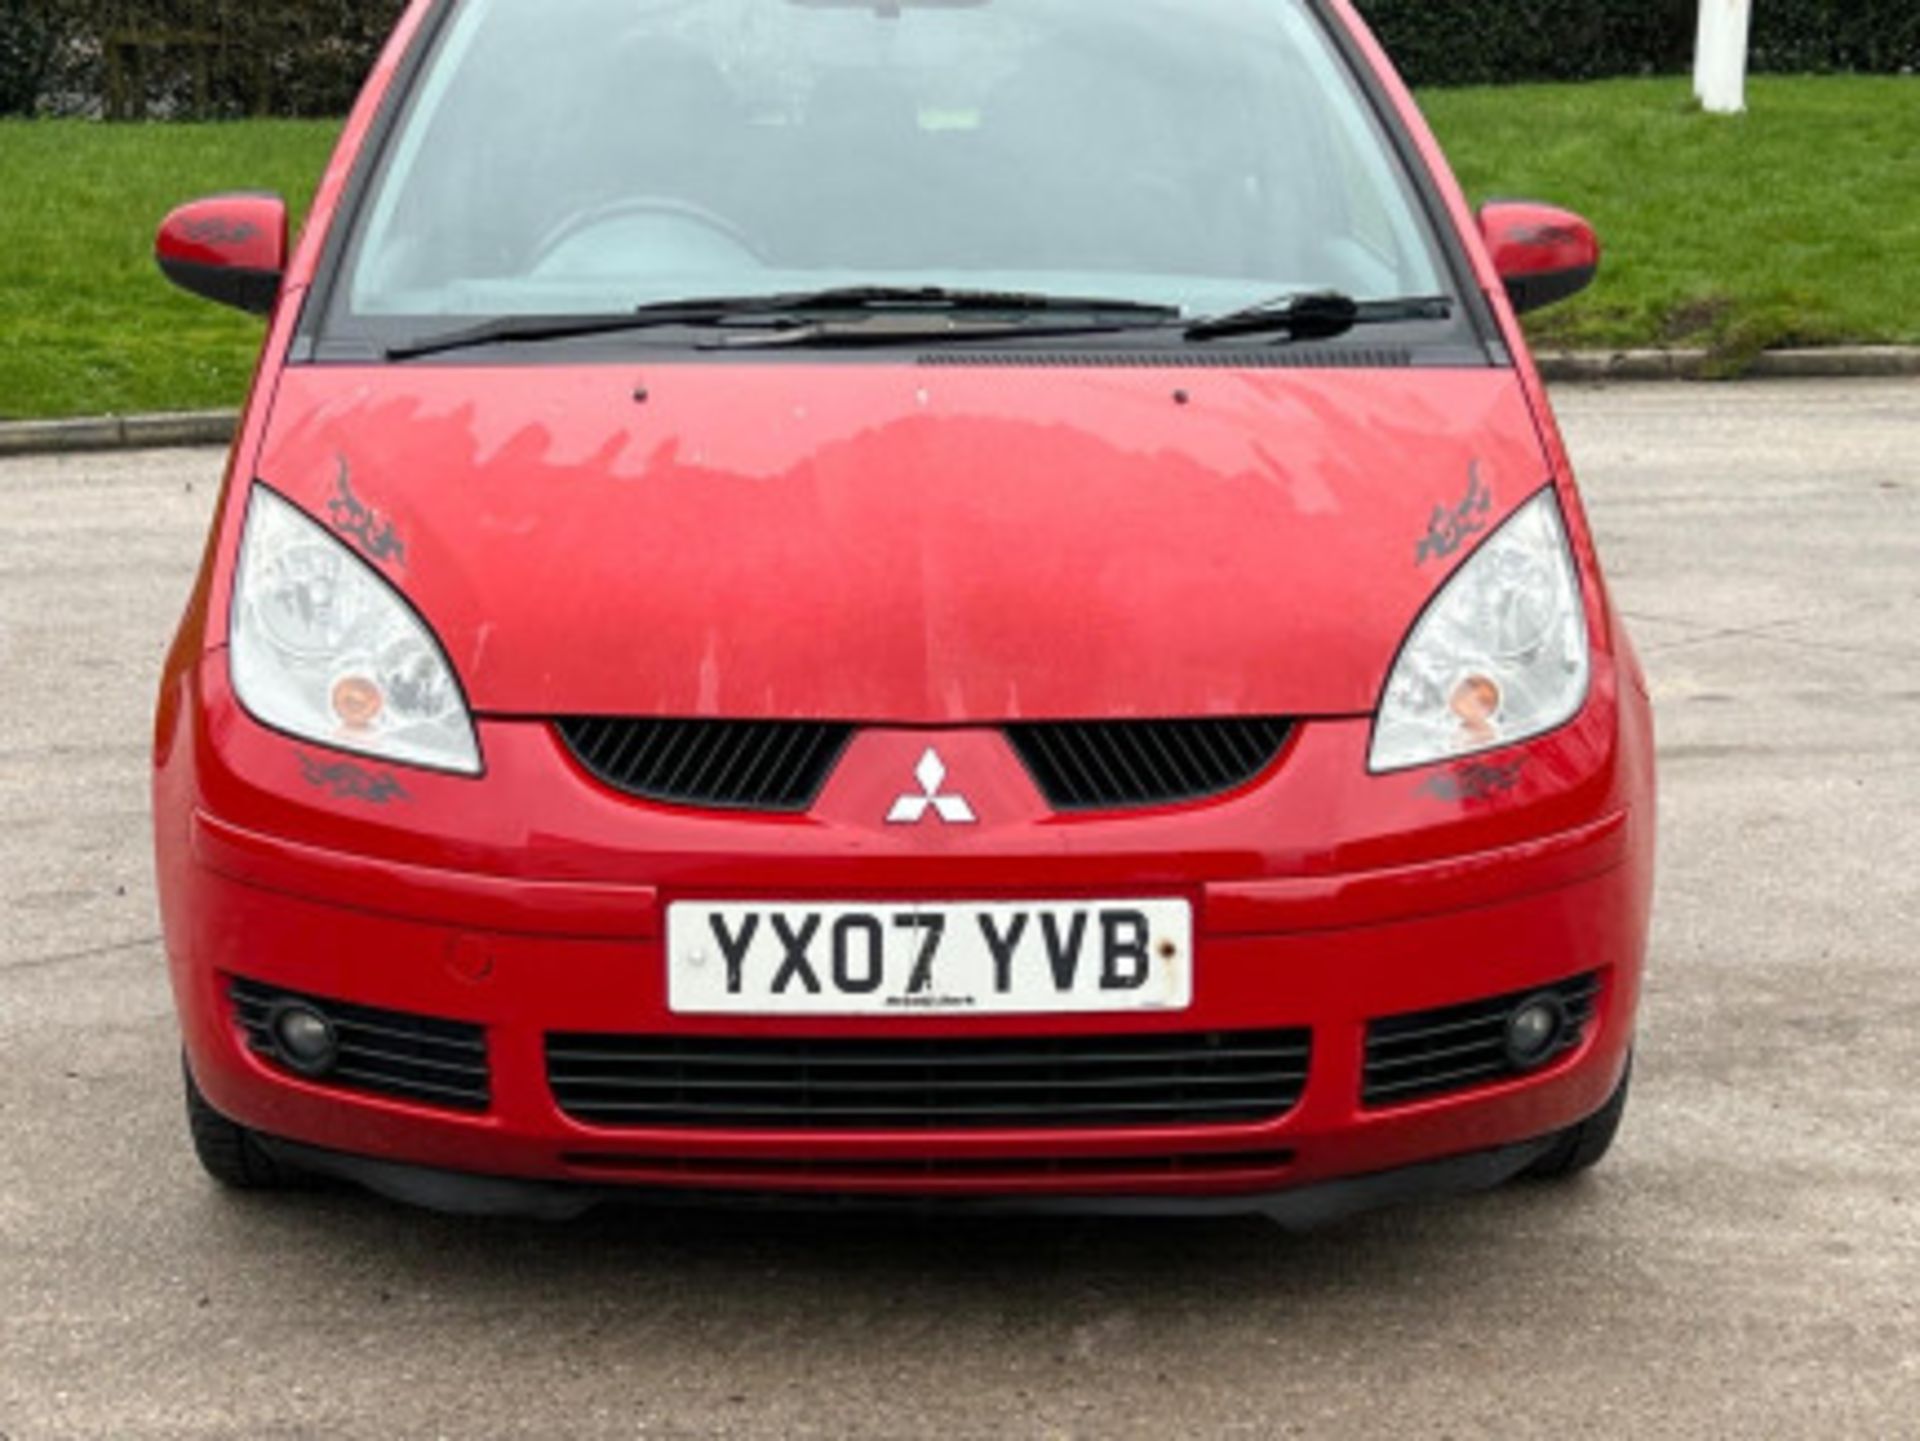 2007 MITSUBISHI COLT 1.5 DI-D DIESEL AUTOMATIC >>--NO VAT ON HAMMER--<< - Image 53 of 127